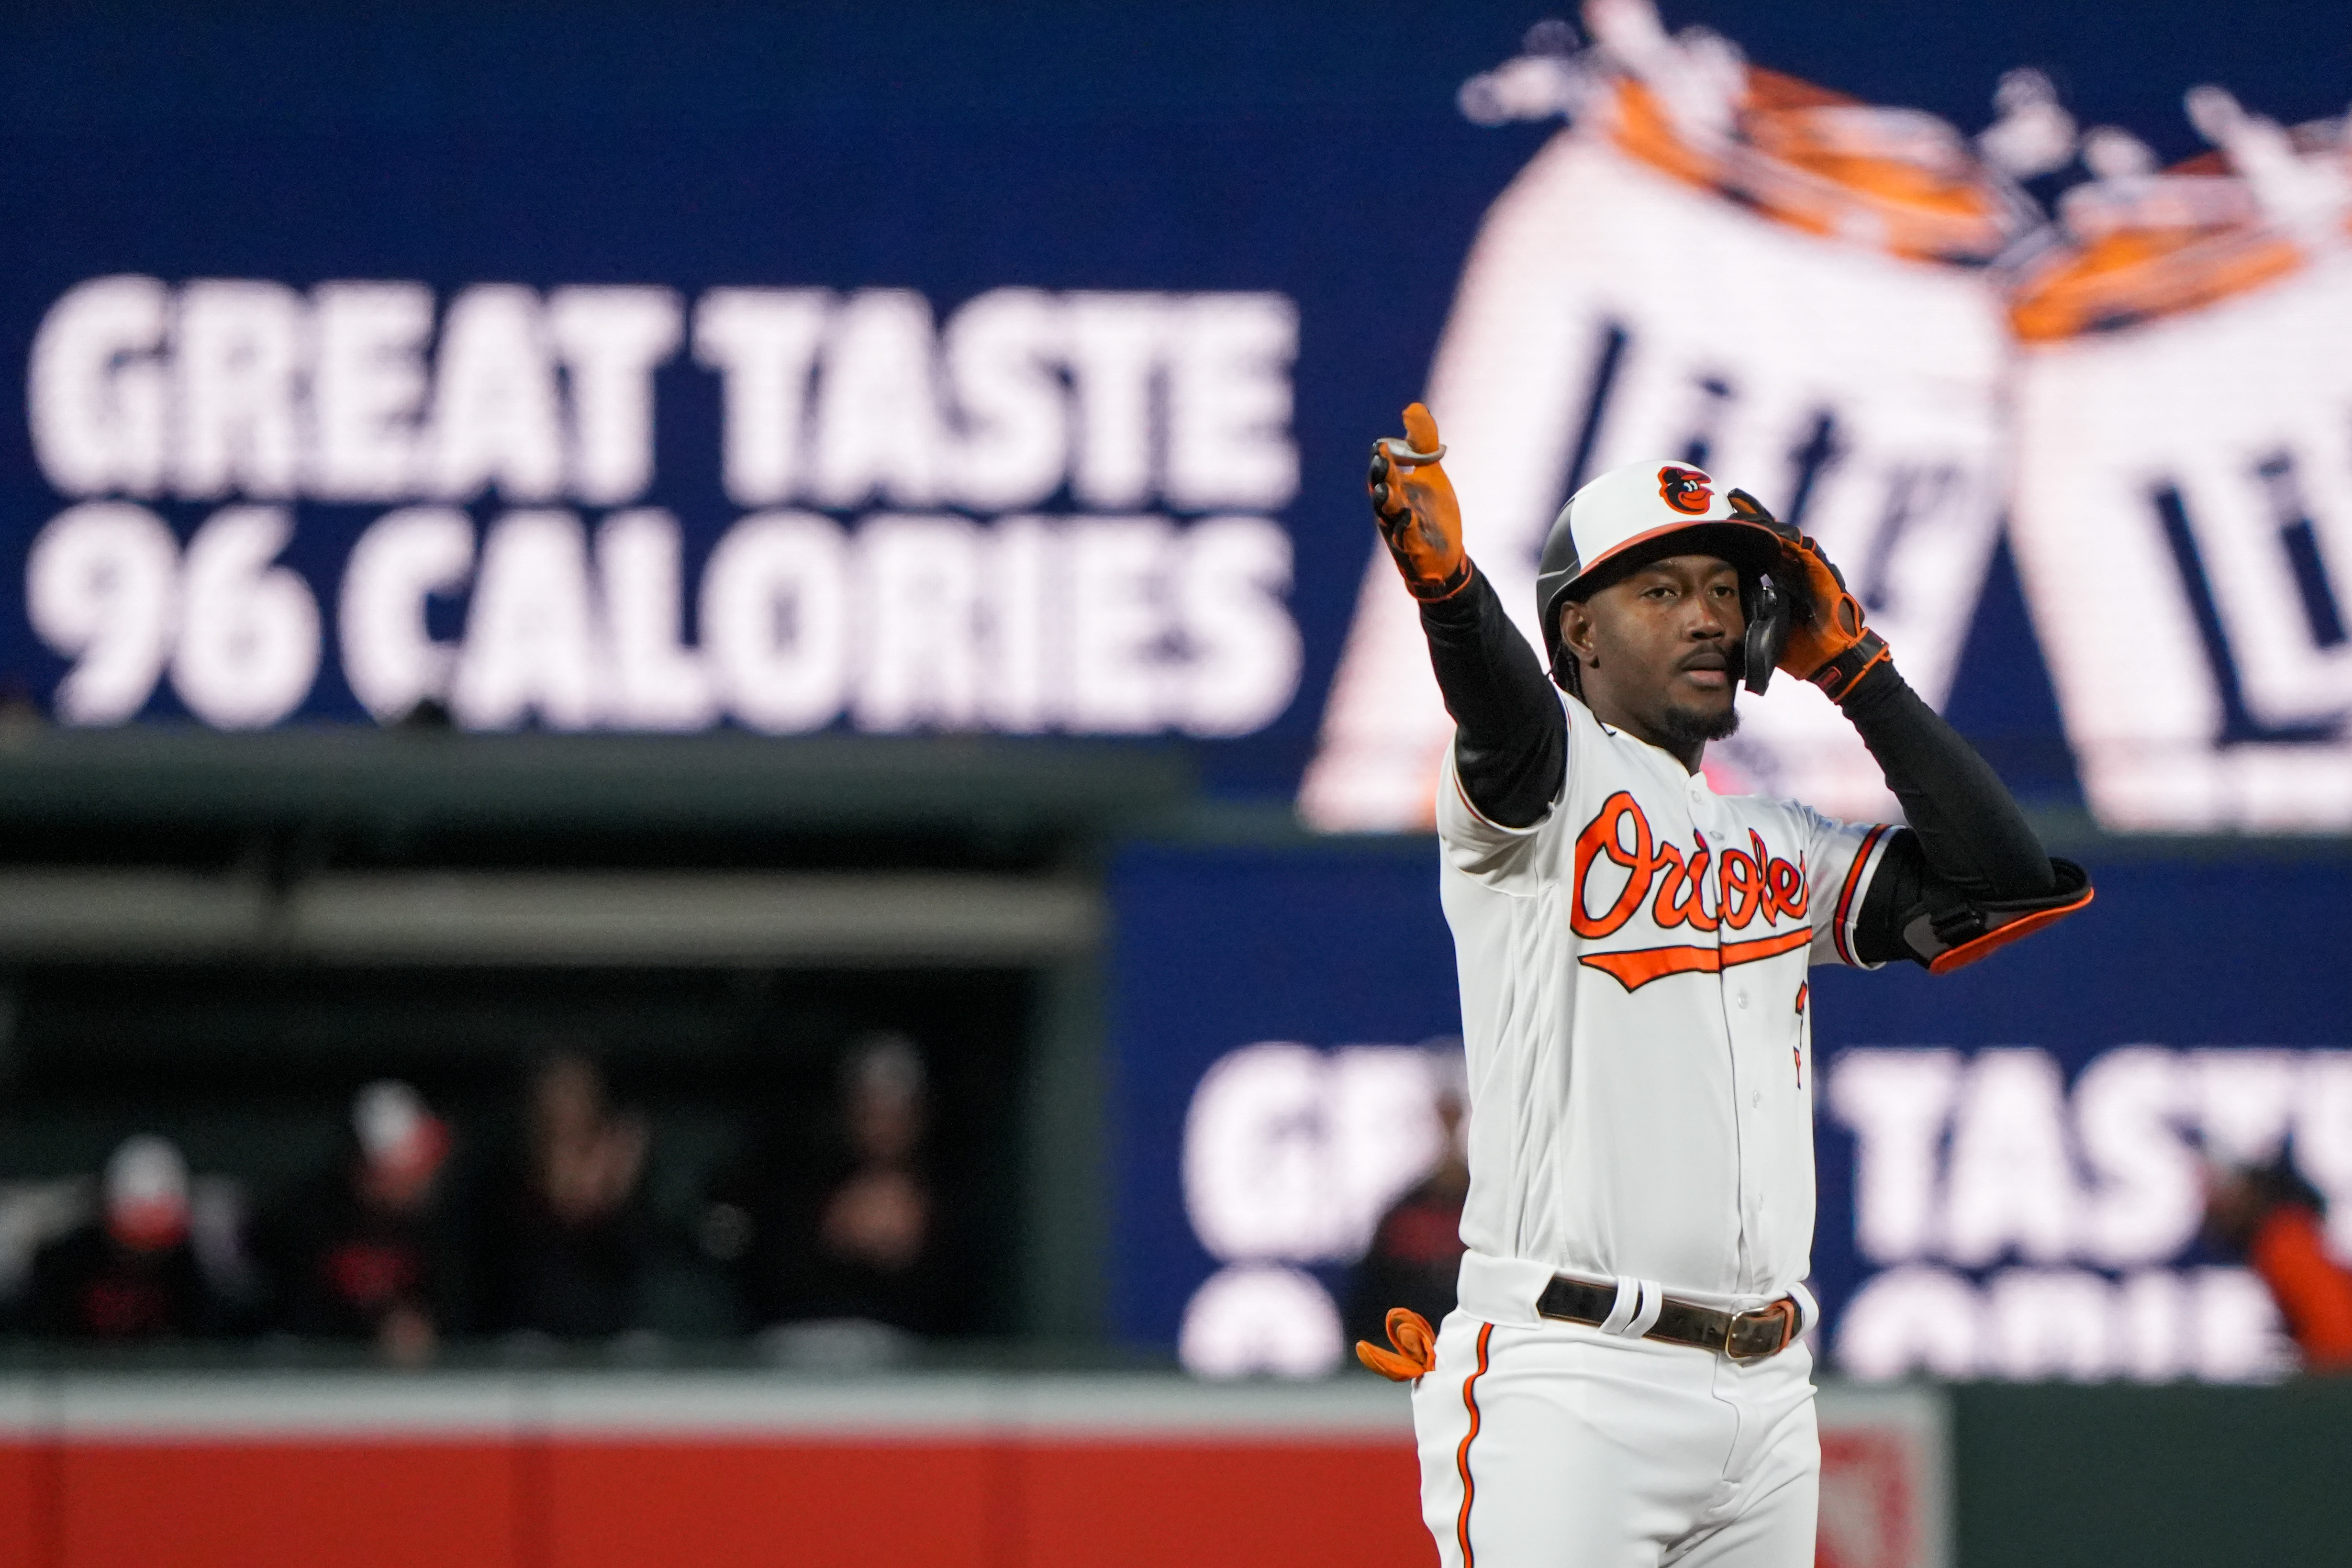 Quickie - Injured by HBP, Orioles' Jorge Mateo Helped to 1st Base